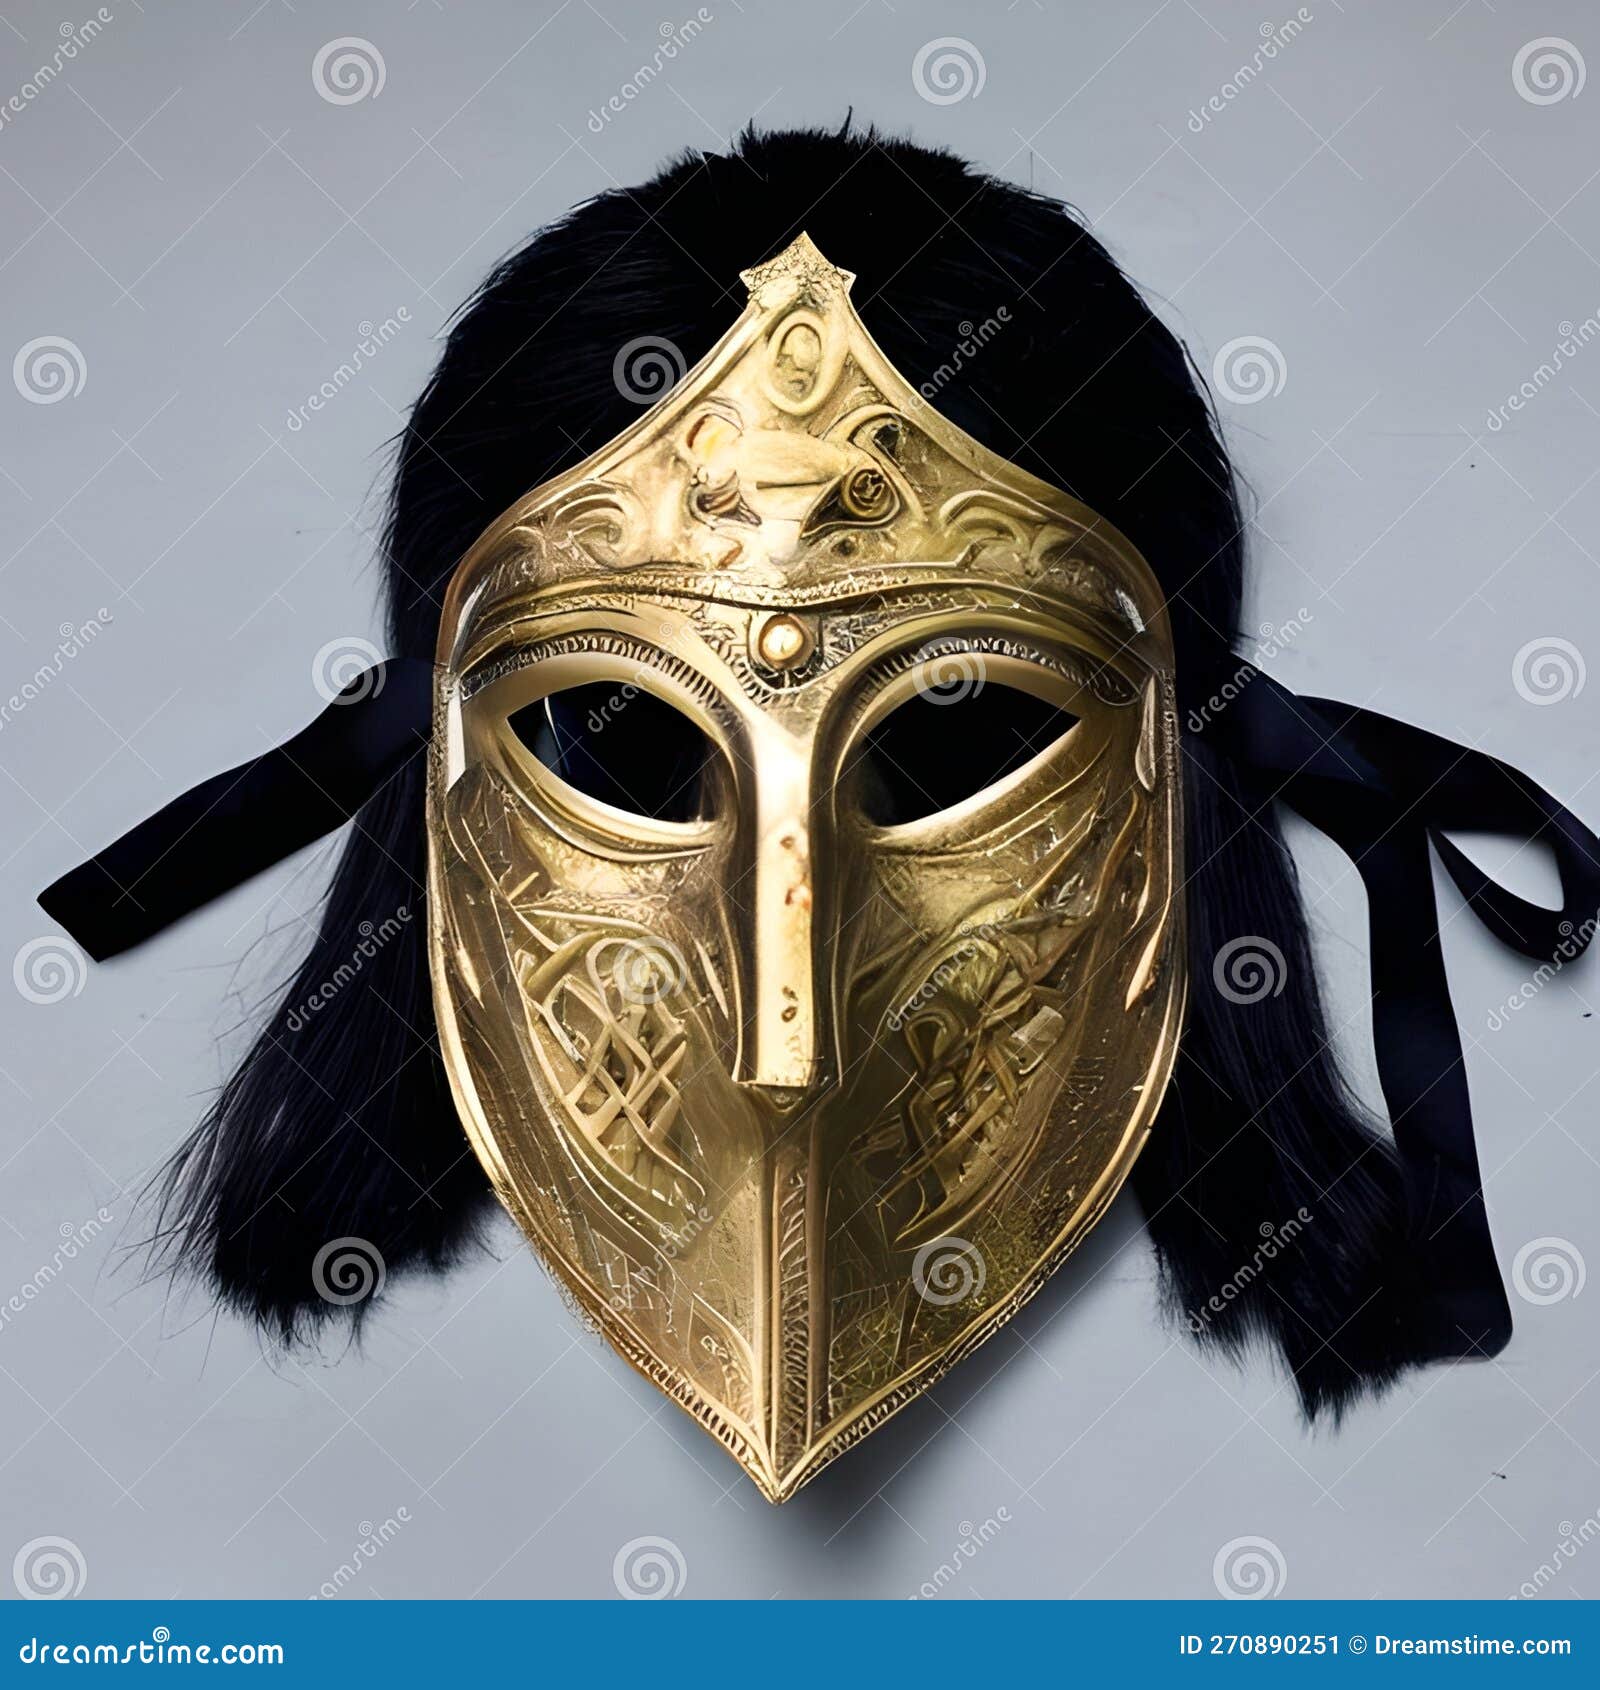 Cult Ritual Mask Made Of Gold Metal, Decorative Artwork In Traditional ...